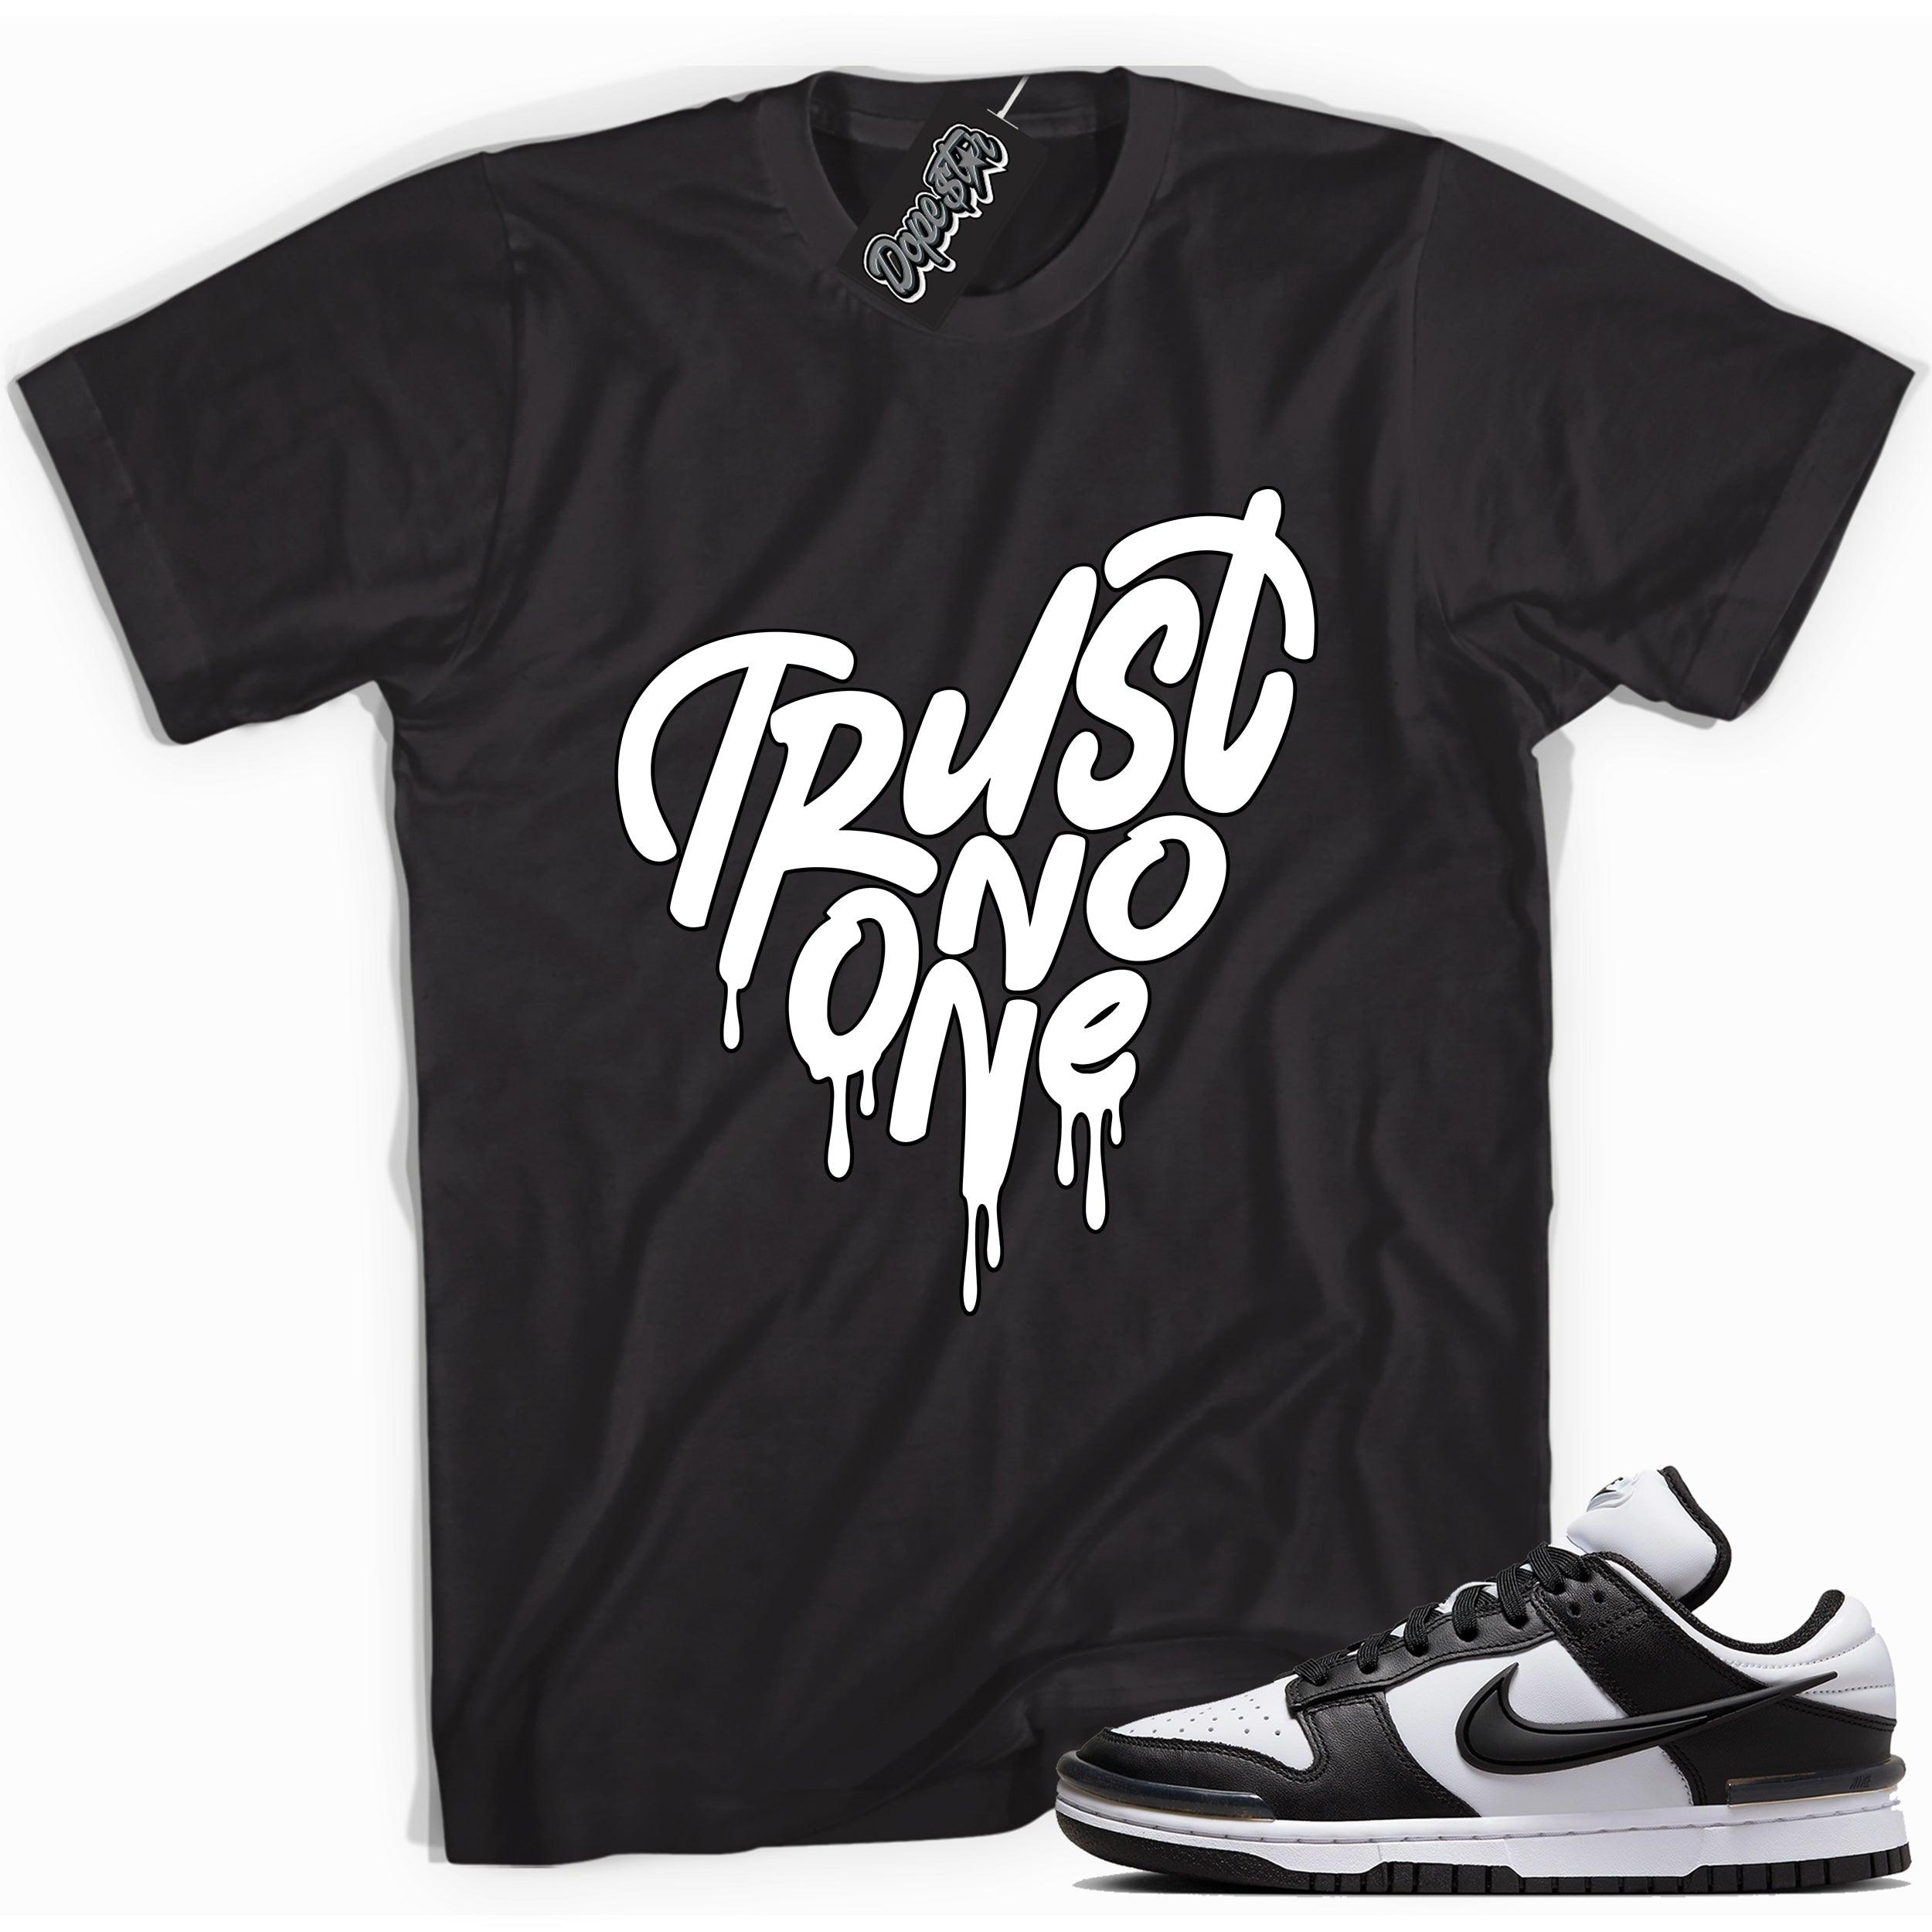 Cool black graphic tee with 'trust no one' print, that perfectly matches Nike Dunk Low Twist Panda sneakers.